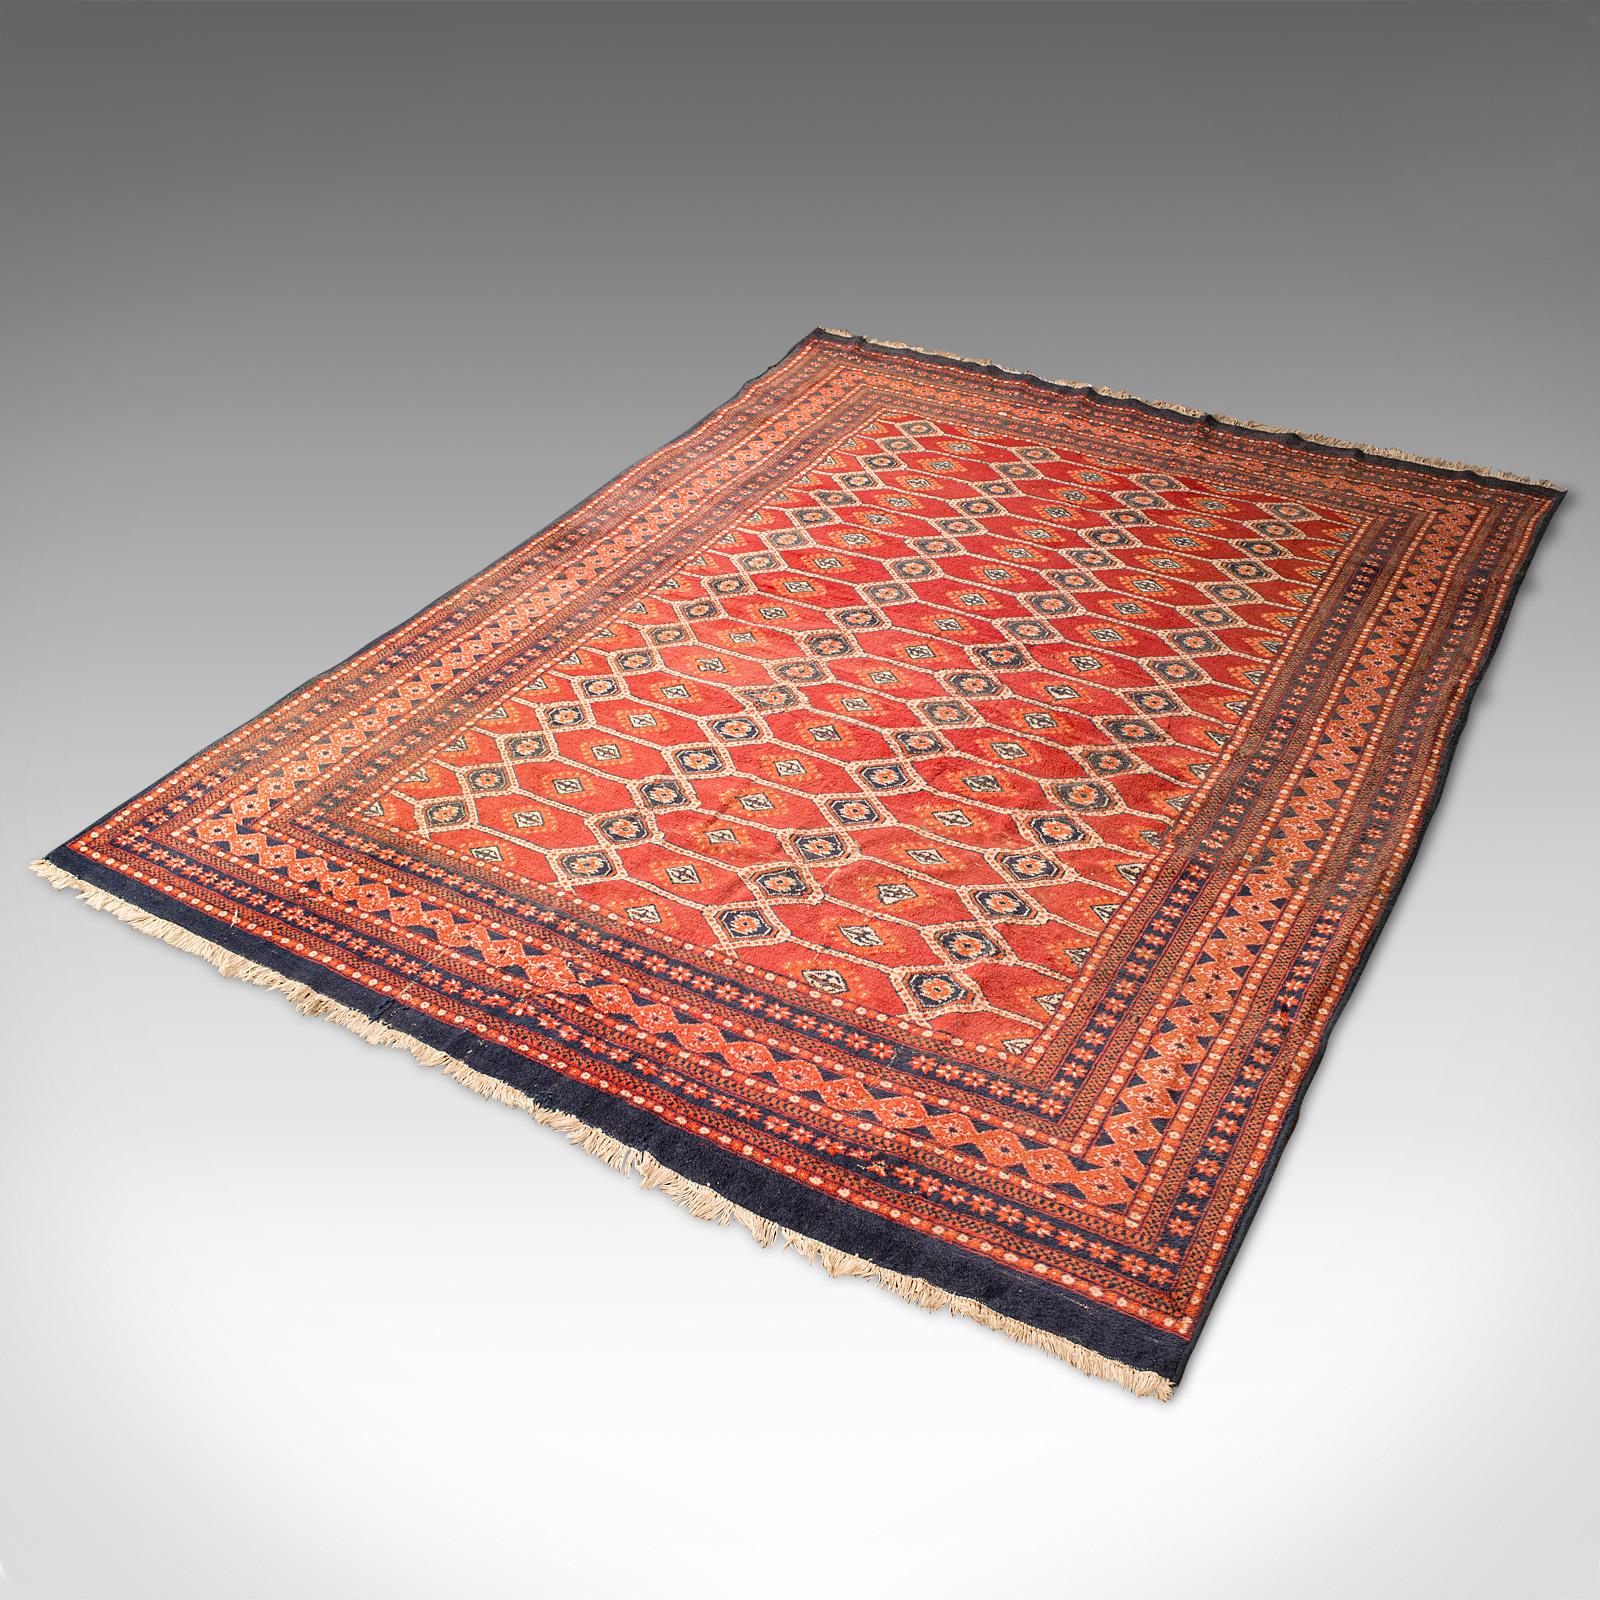 This is a large vintage Bokhara rug. A Middle Eastern, woven hall or living room carpet, dating to the late 20th century, circa 1970.

Generously sized Qali at 308cm (1214.25